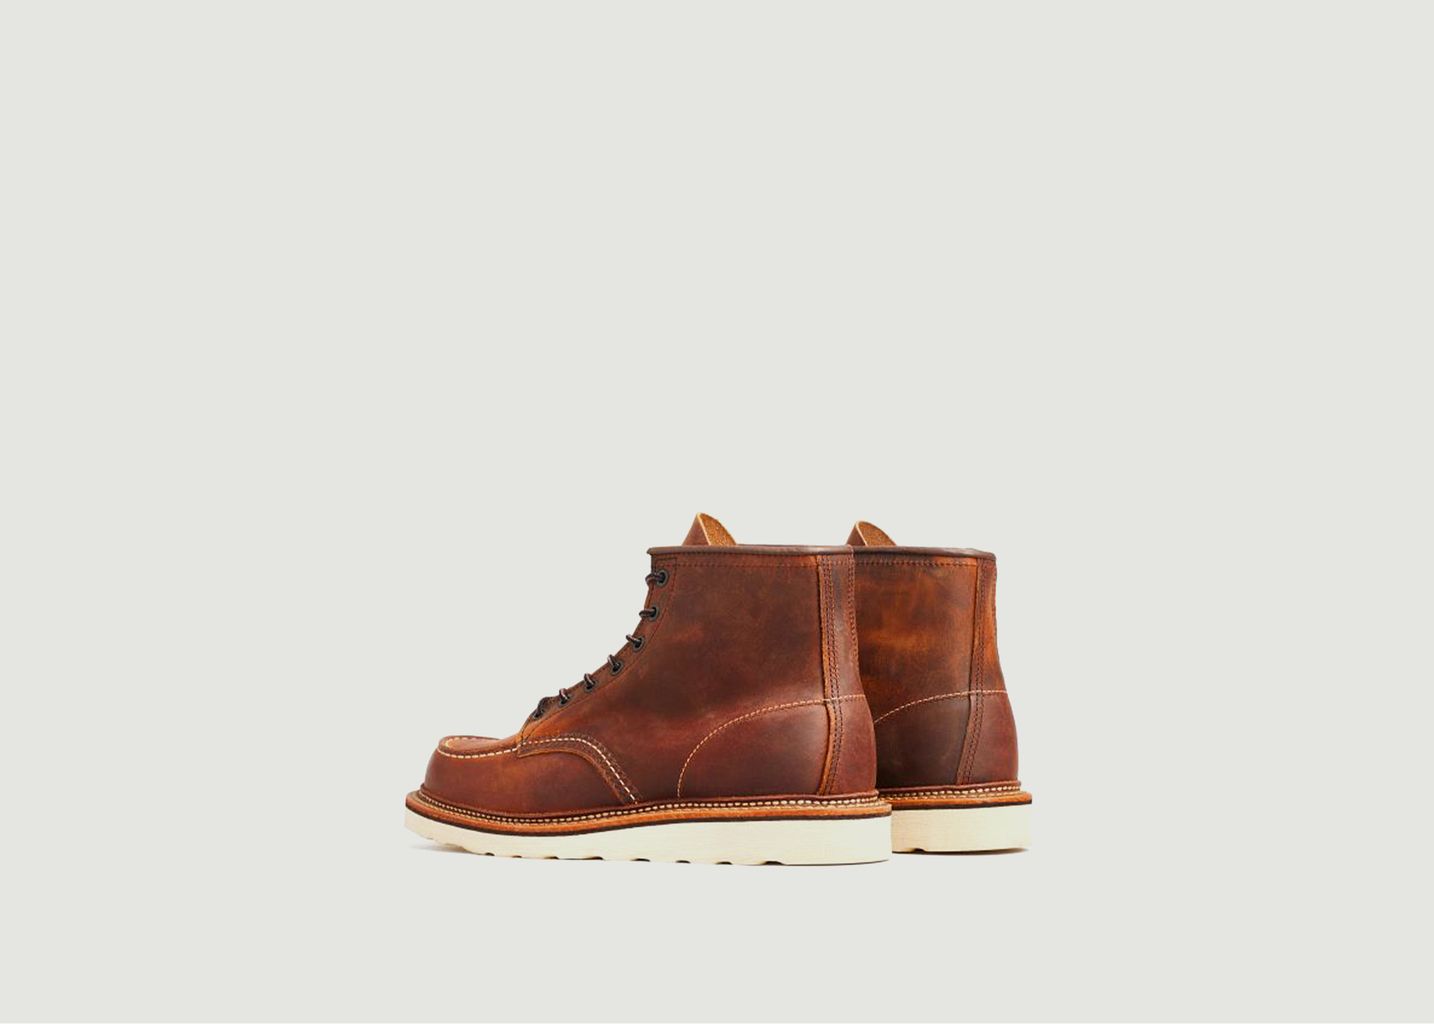 Leather lace-up boots 1907 - Red Wing Shoes